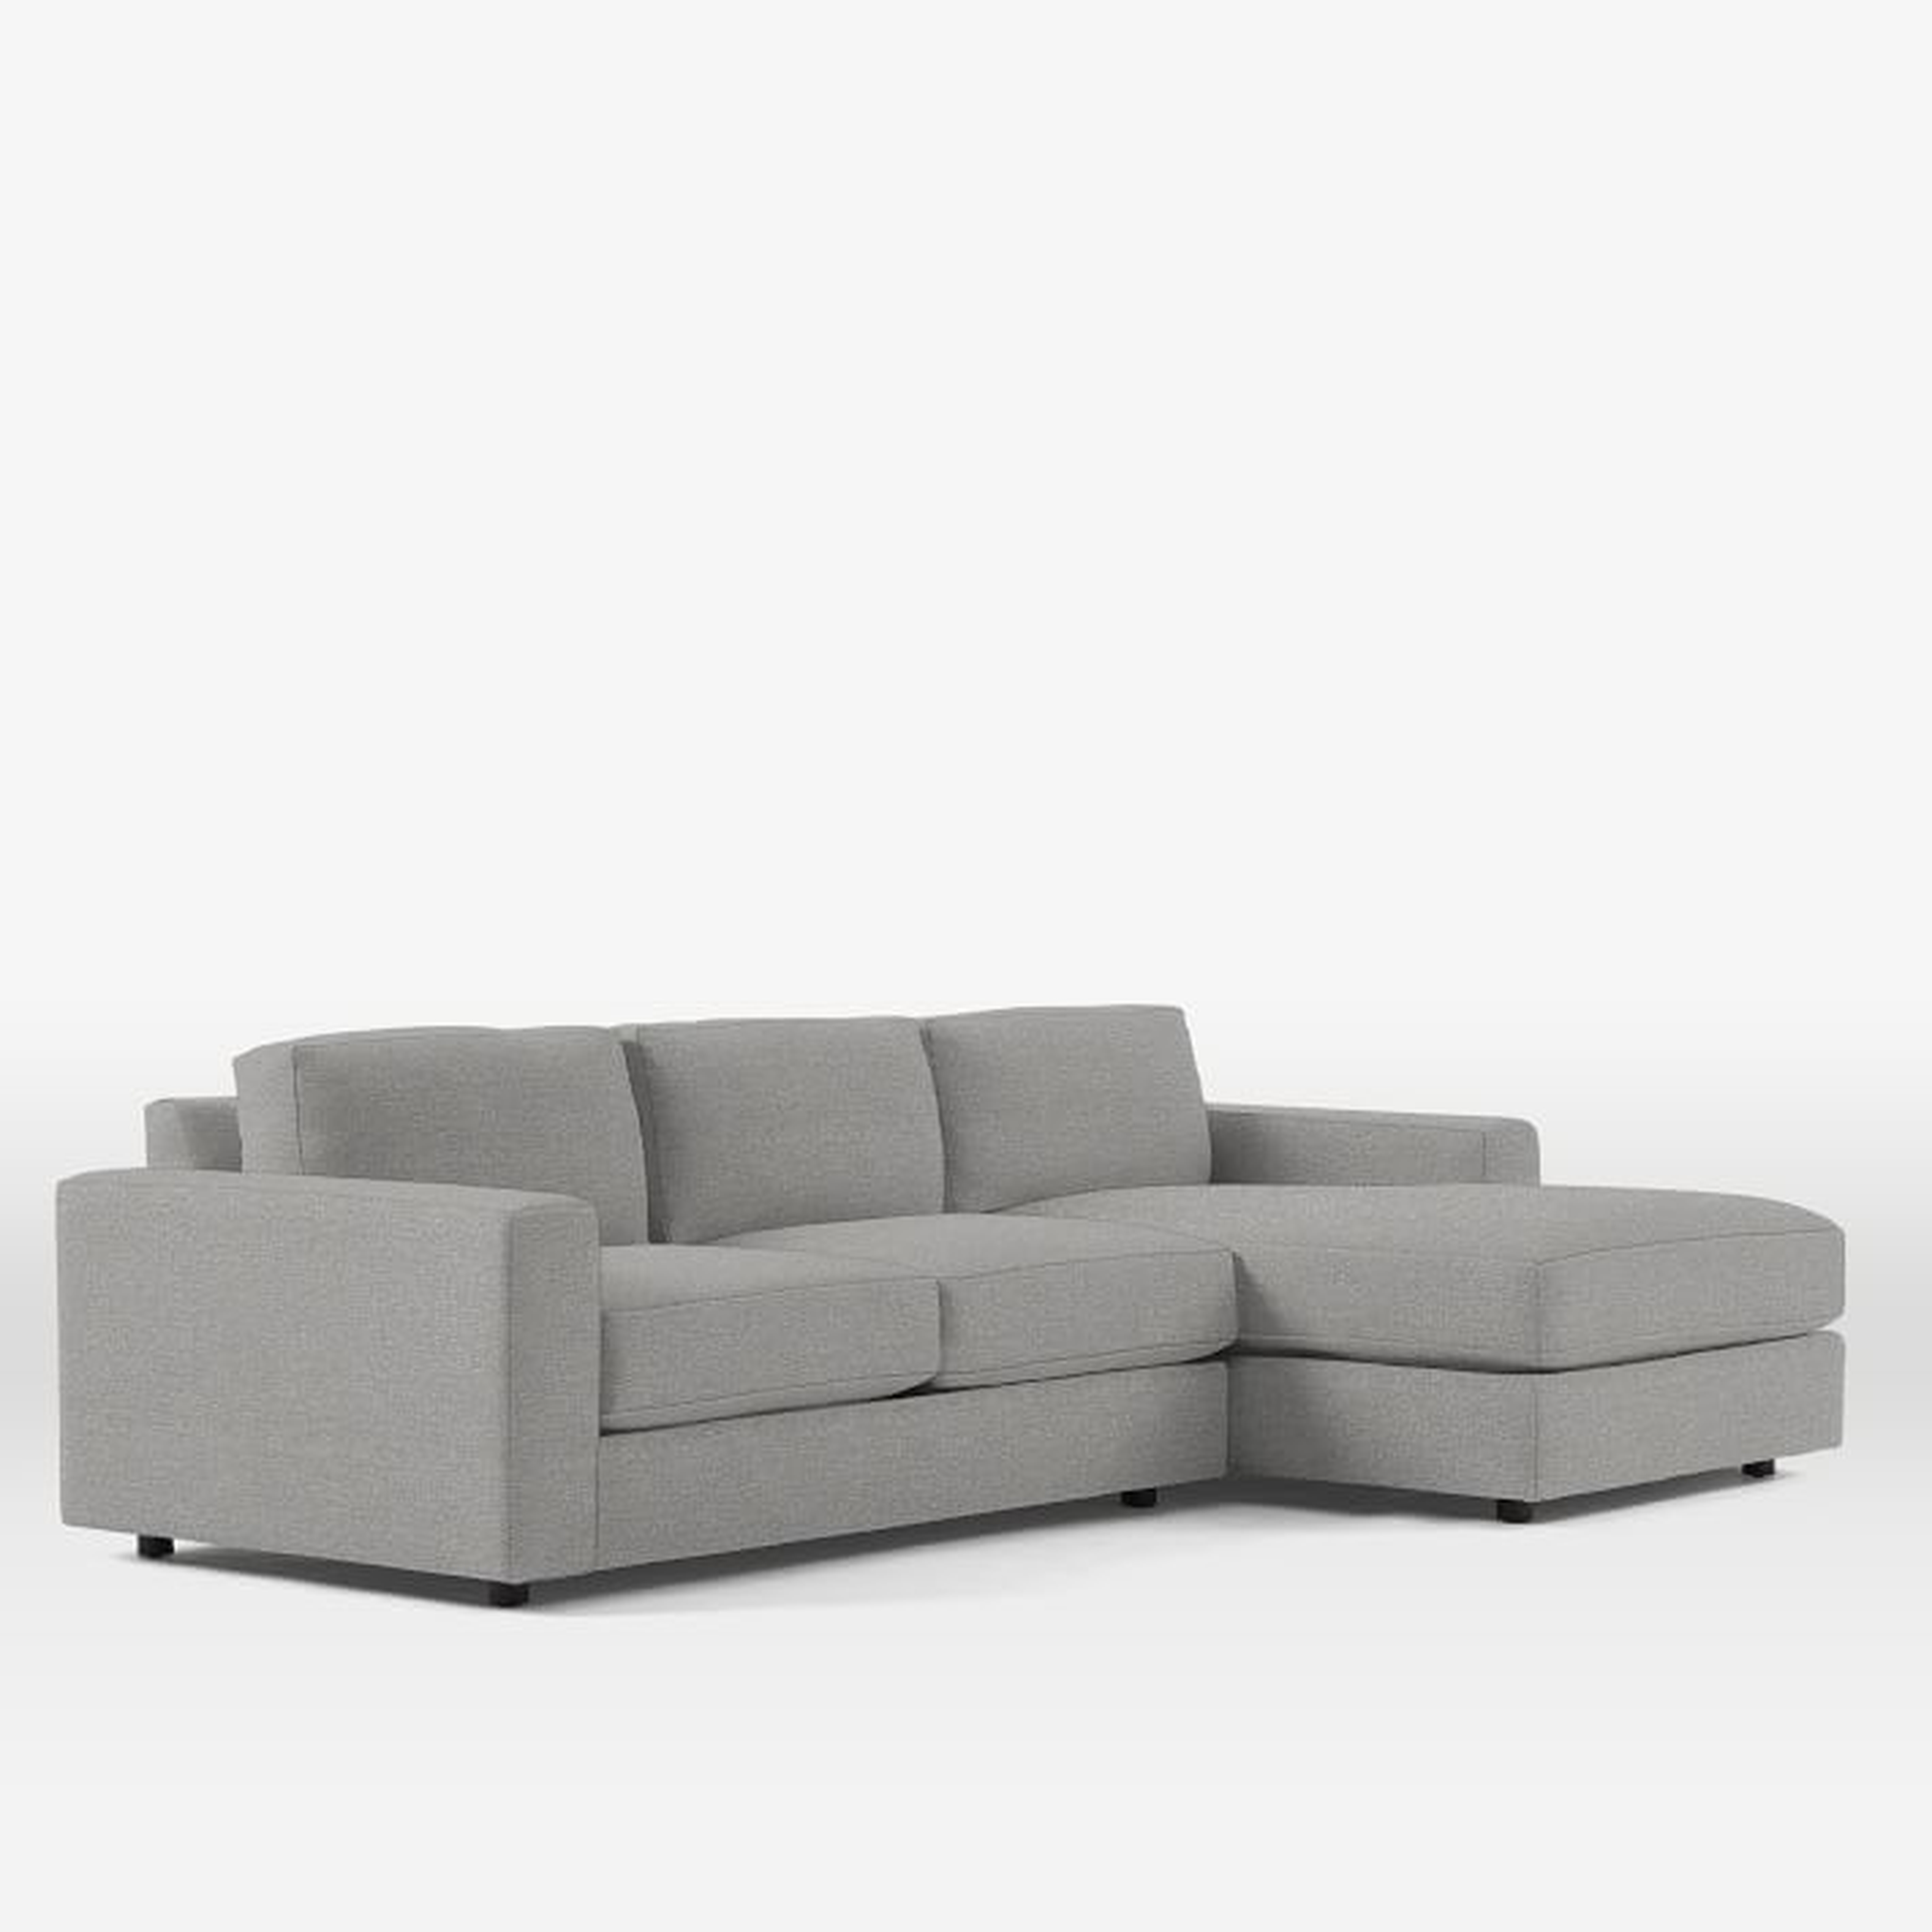 Urban 2-Piece Chaise Sectional - Large Right Chaise, Chenille Tweed-Feather Gray - West Elm